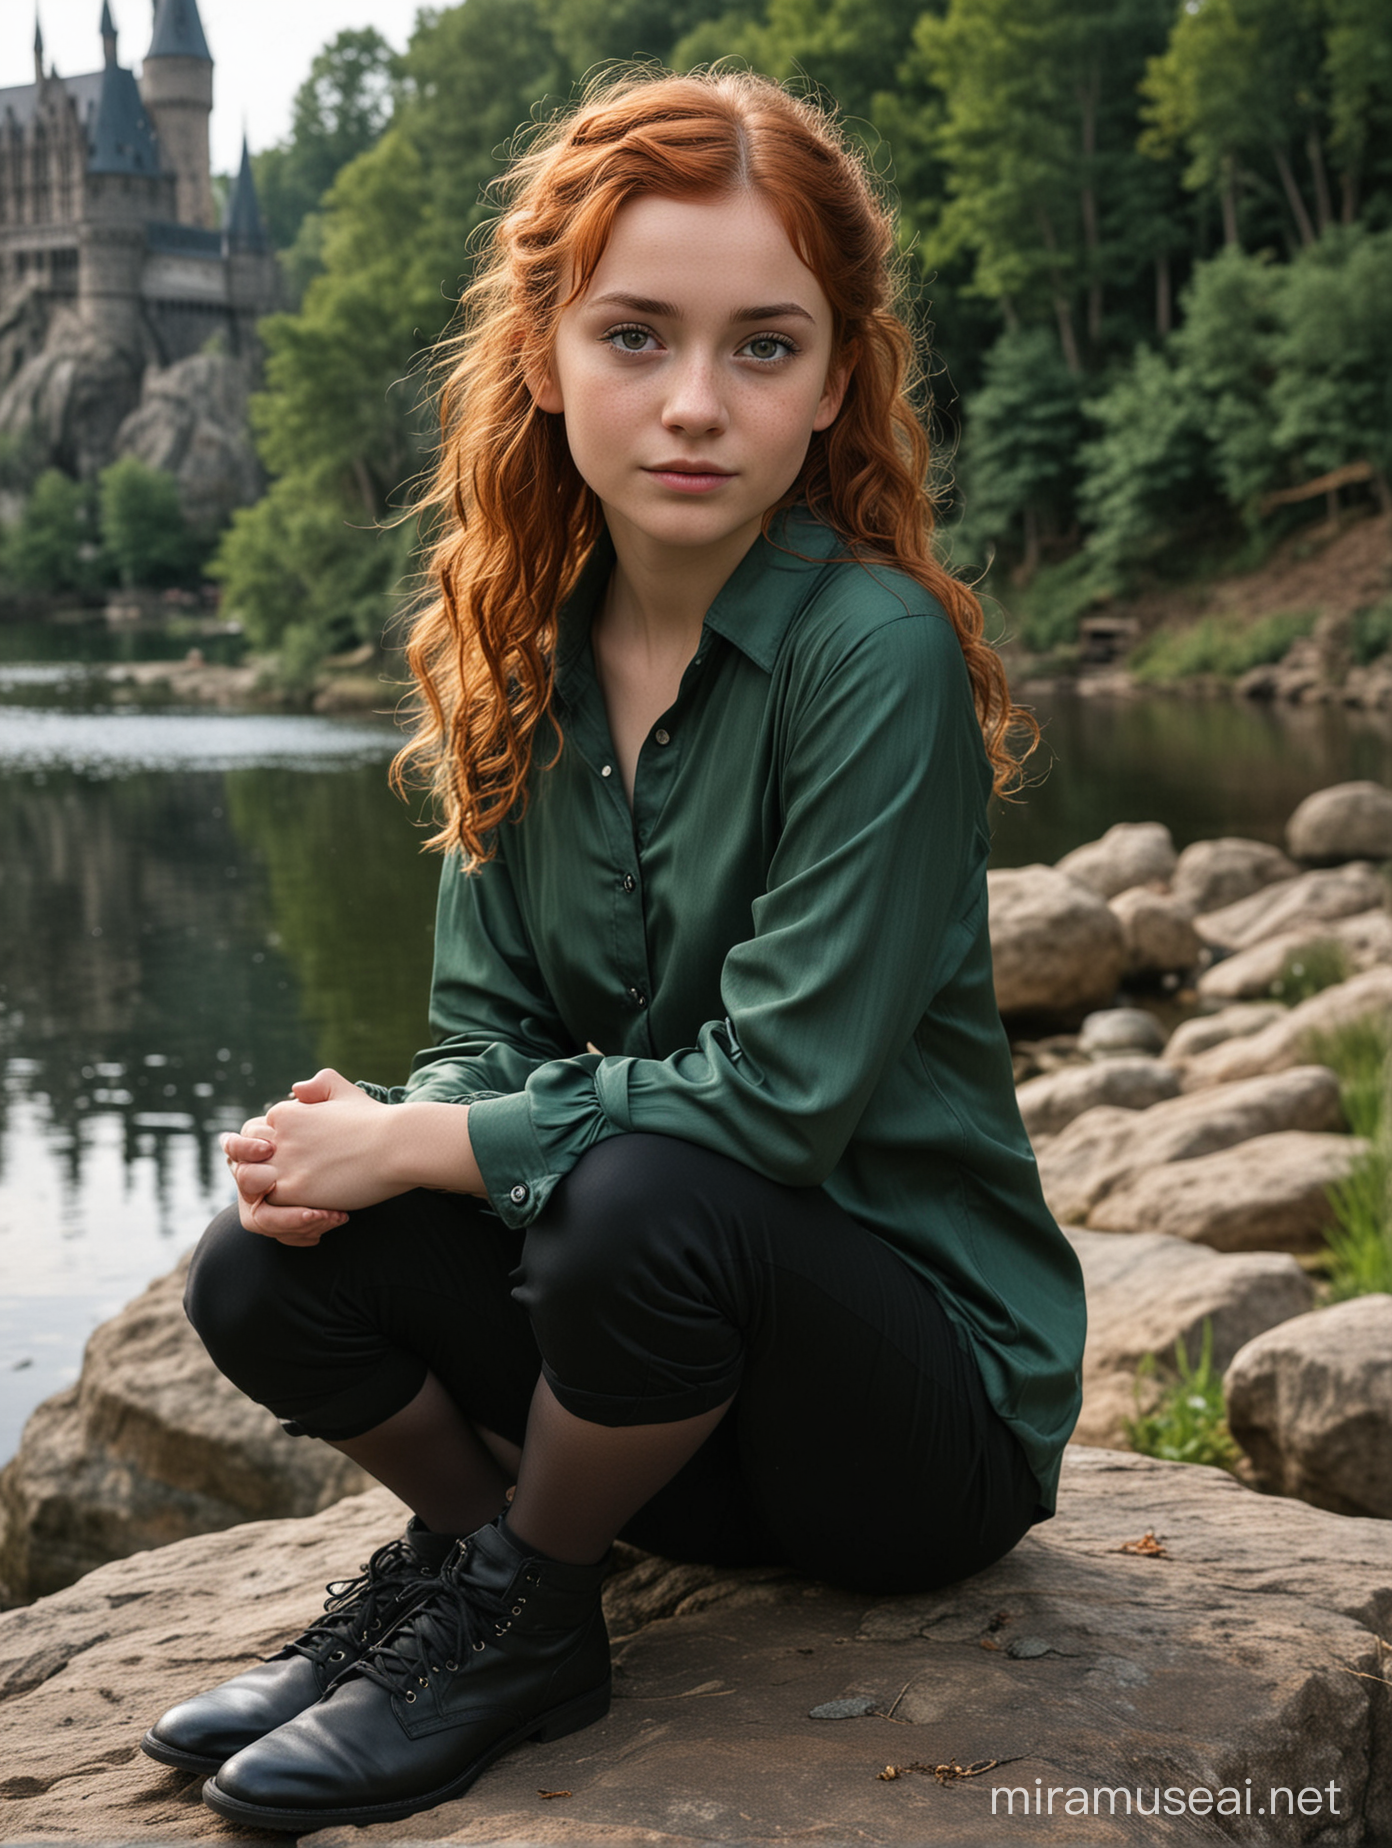 Young Slytherin Witch Contemplates by Black Lake with Hogwarts Castle View